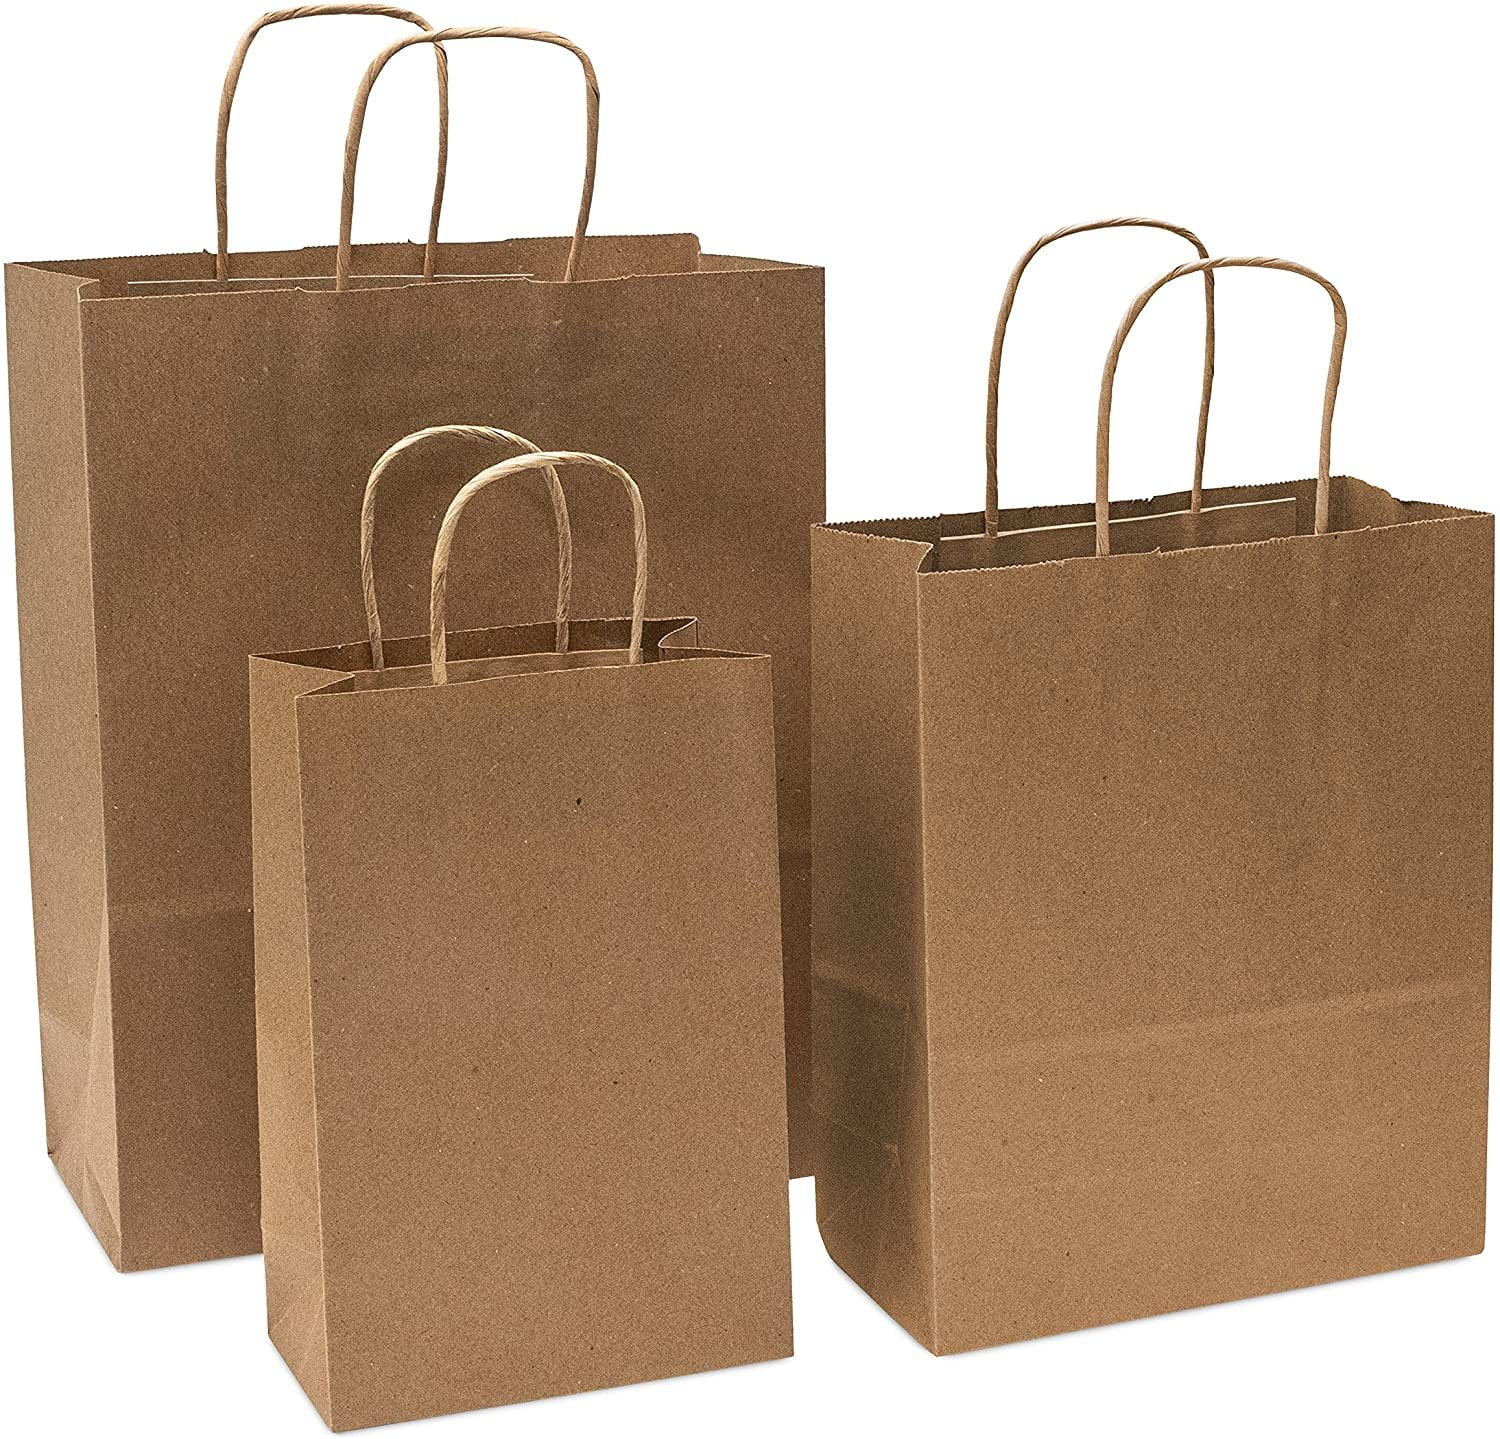 8x4x10" Medium BROWN PAPER CARRIER BAGS with HANDLES Sandwich/Lunch/Food/Fruit 